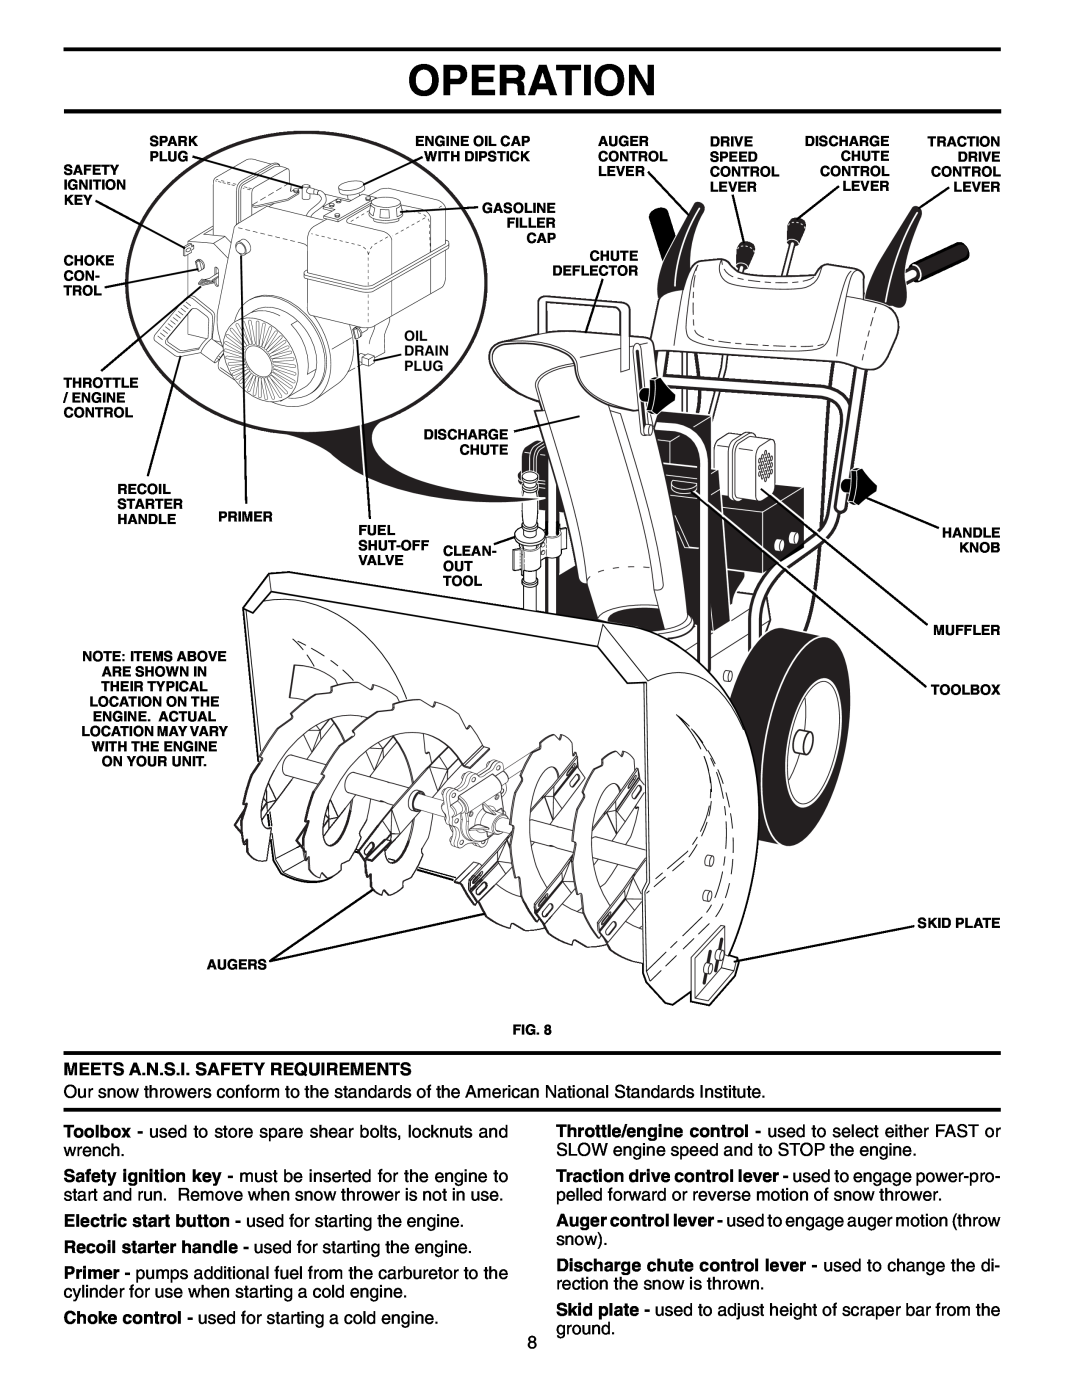 Poulan 199350 owner manual Operation, Meets A.N.S.I. Safety Requirements 